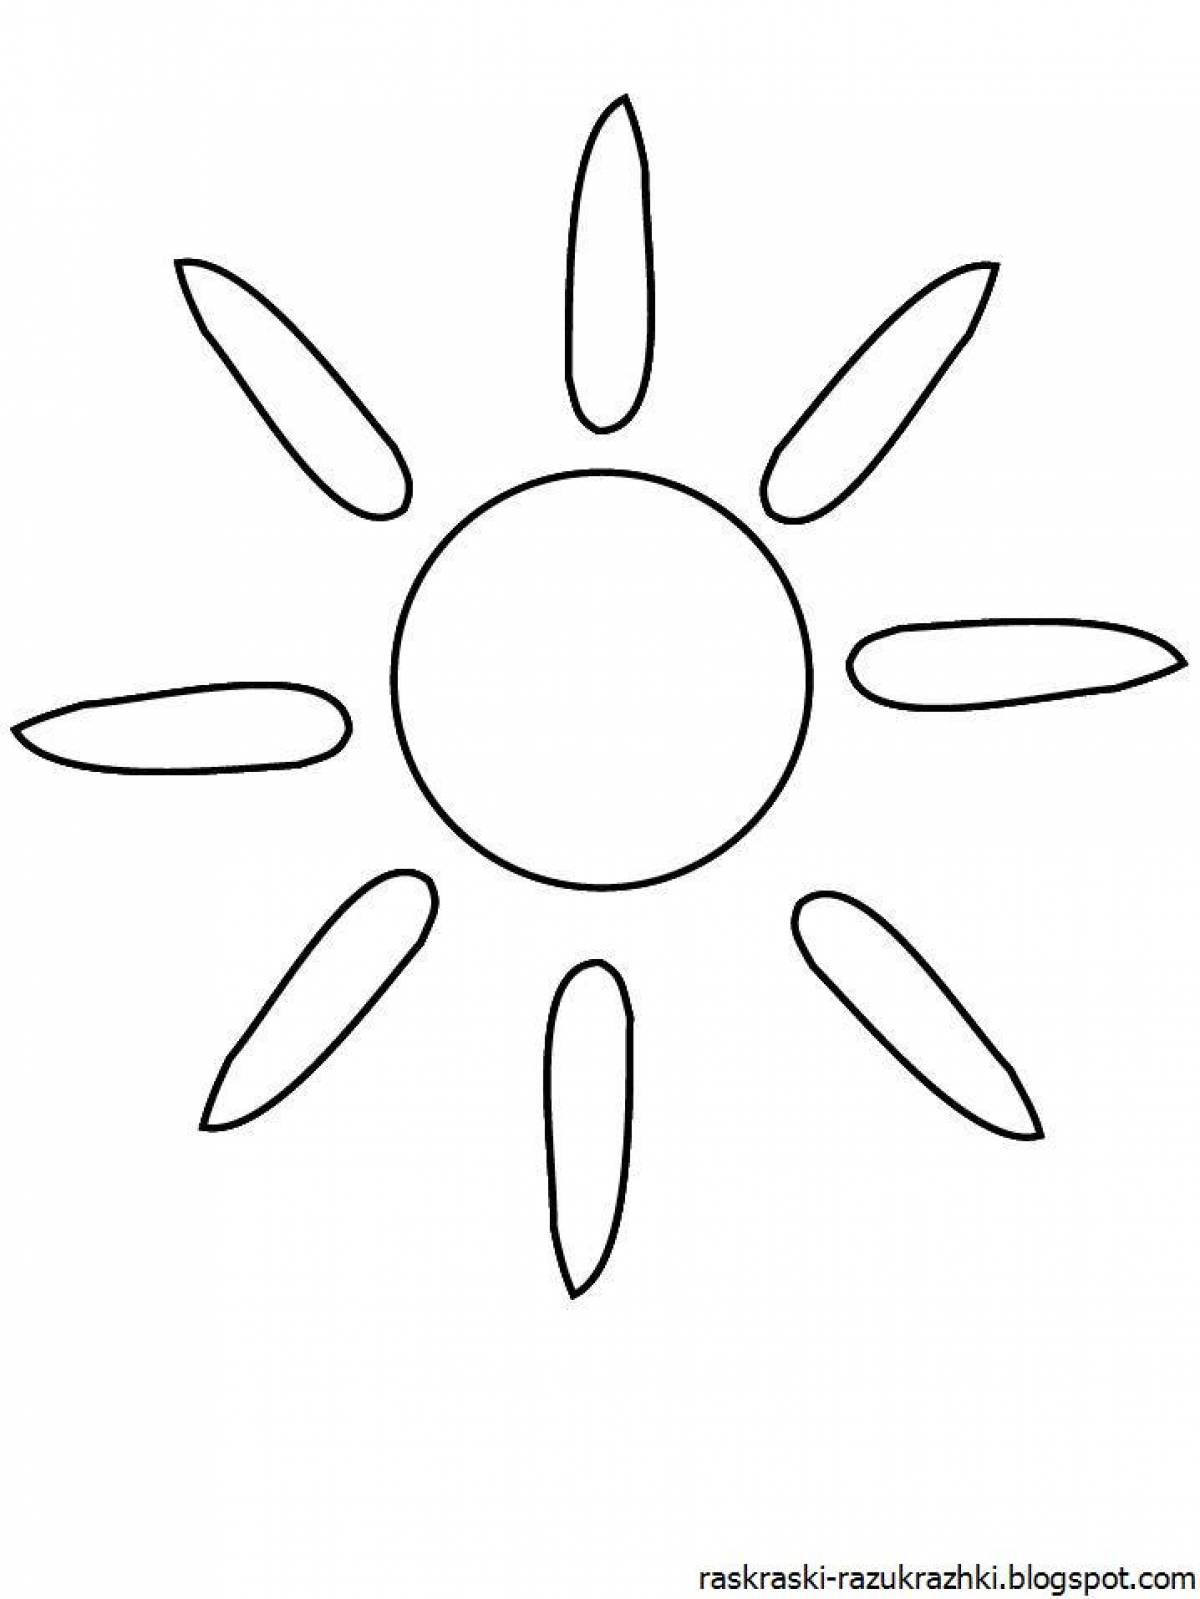 Shimmery sun coloring book for kids